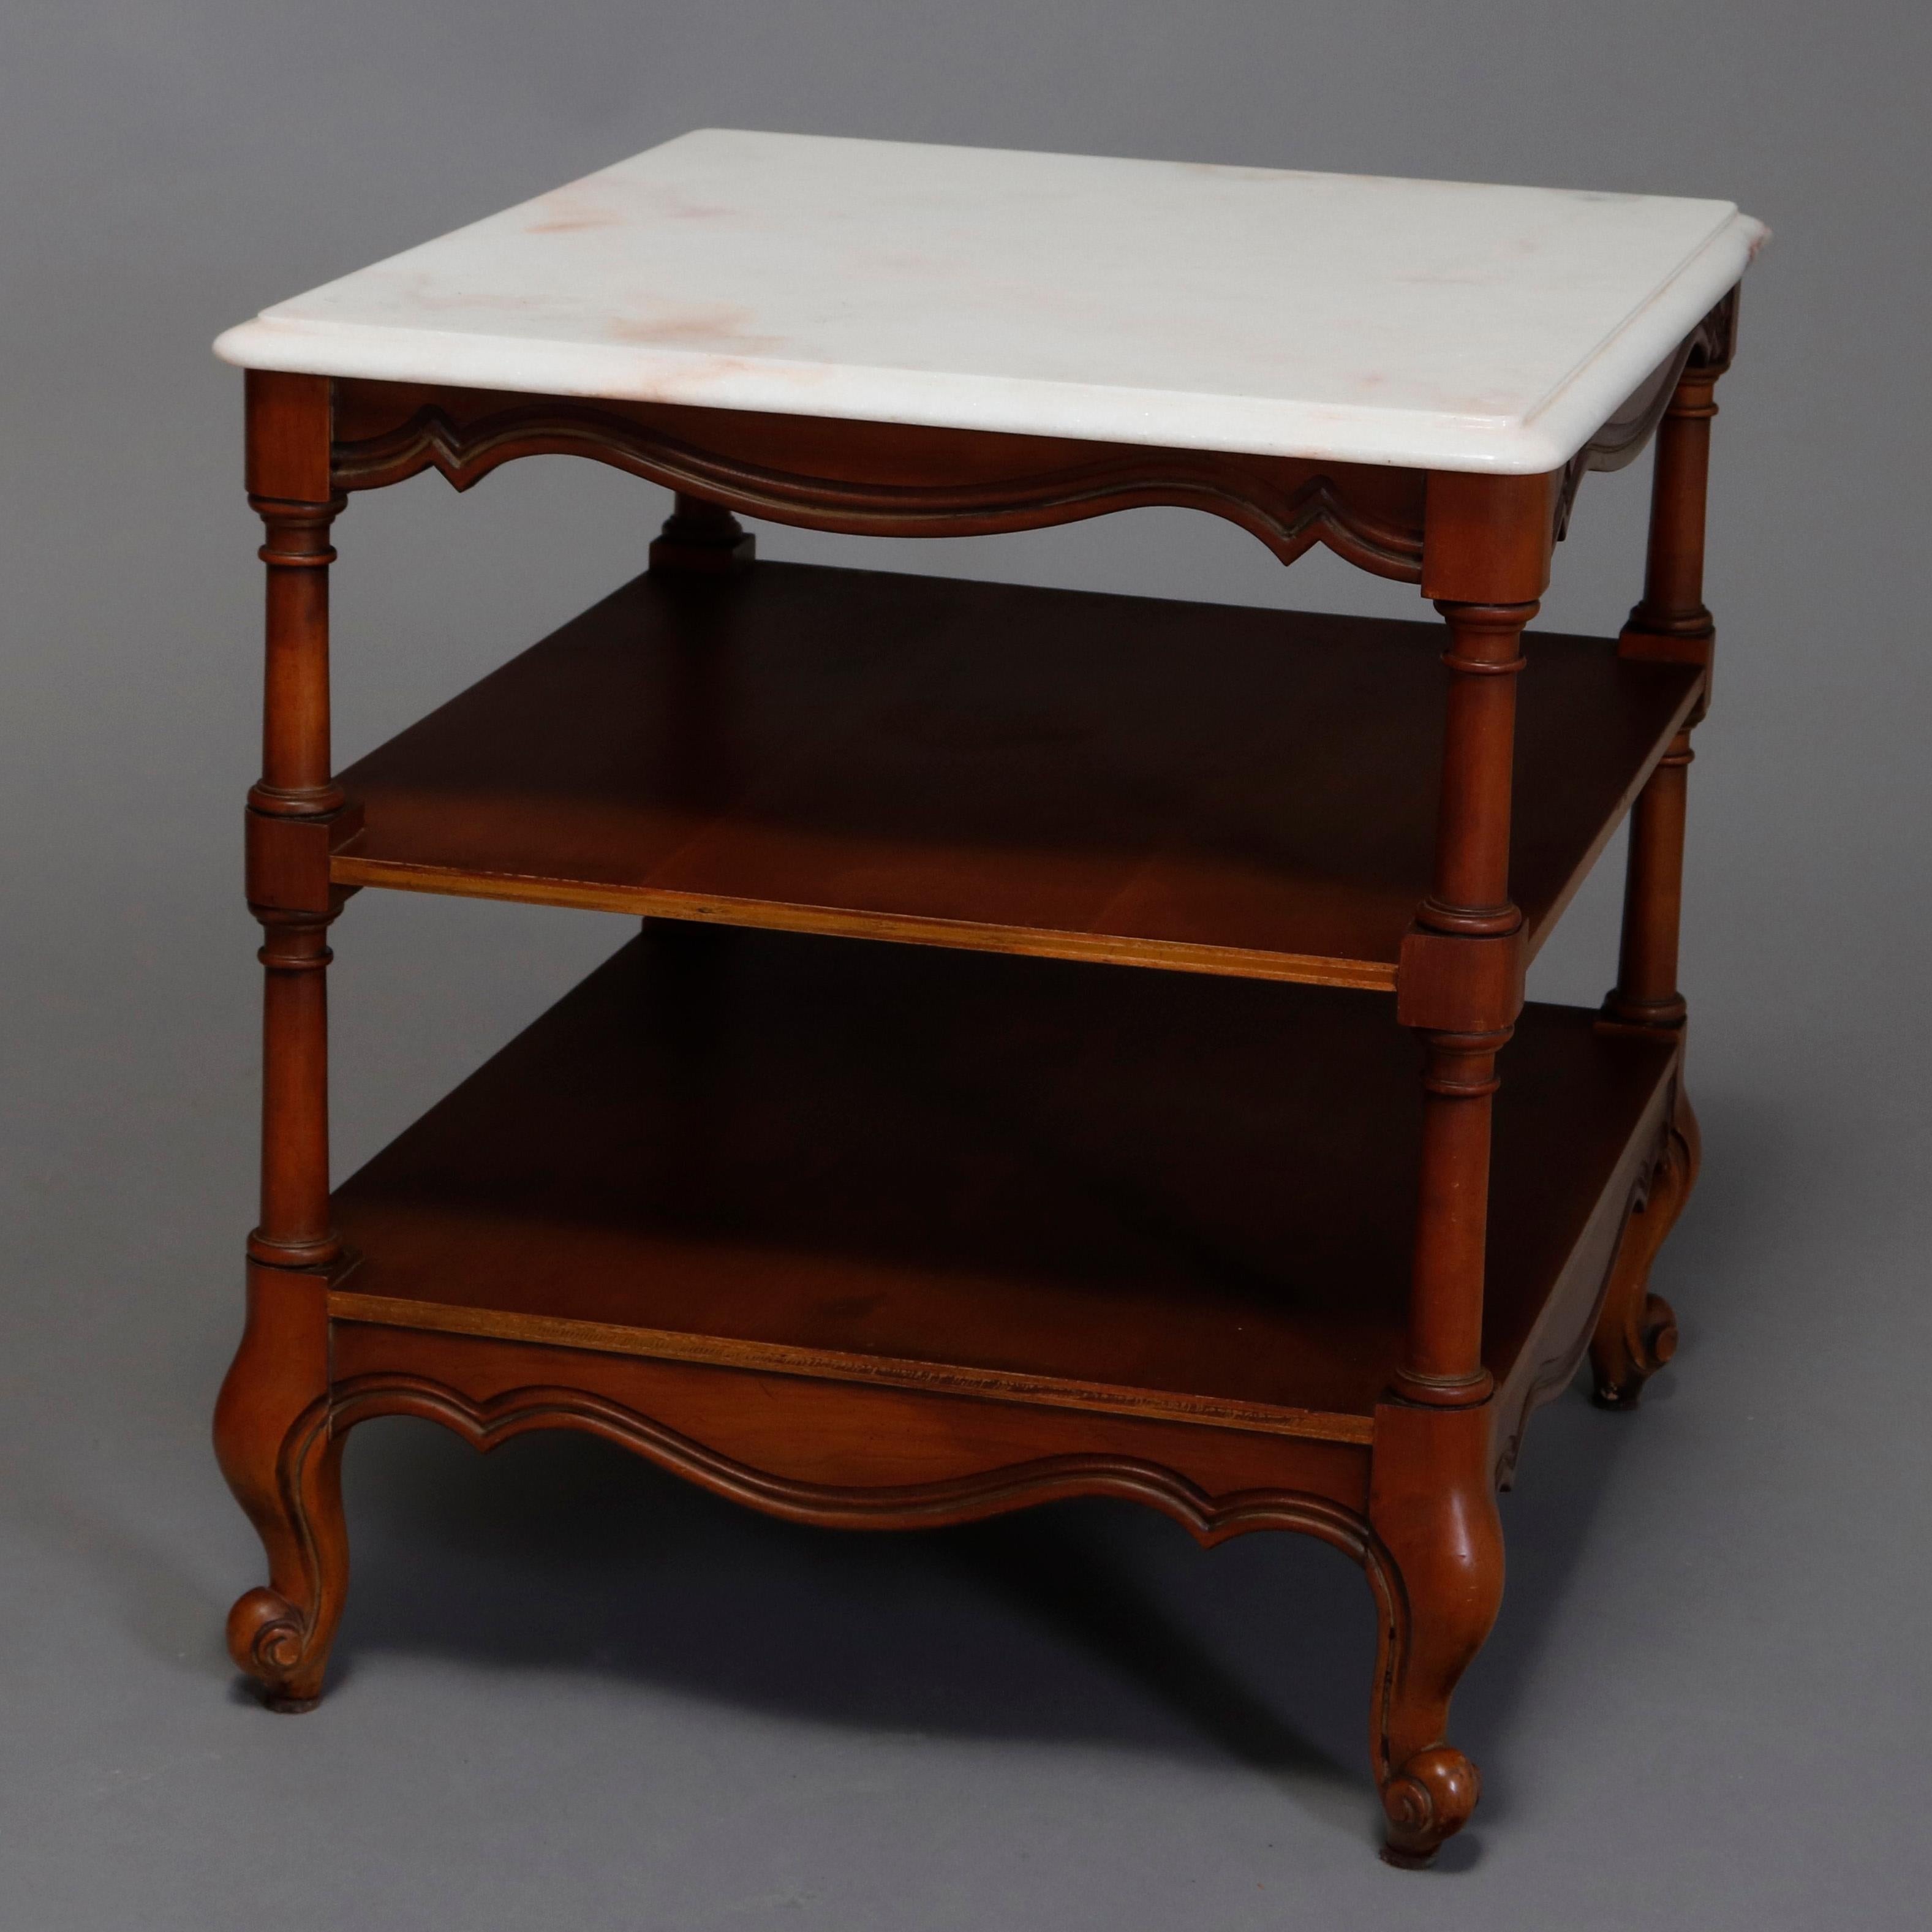 A pair of vintage mahogany end tables each offer beveled marble top surmounting shaped skirt, two display shelves and raised on scroll form feet, 20th century

***DELIVERY NOTICE – Due to COVID-19 we are employing NO-CONTACT PRACTICES in the